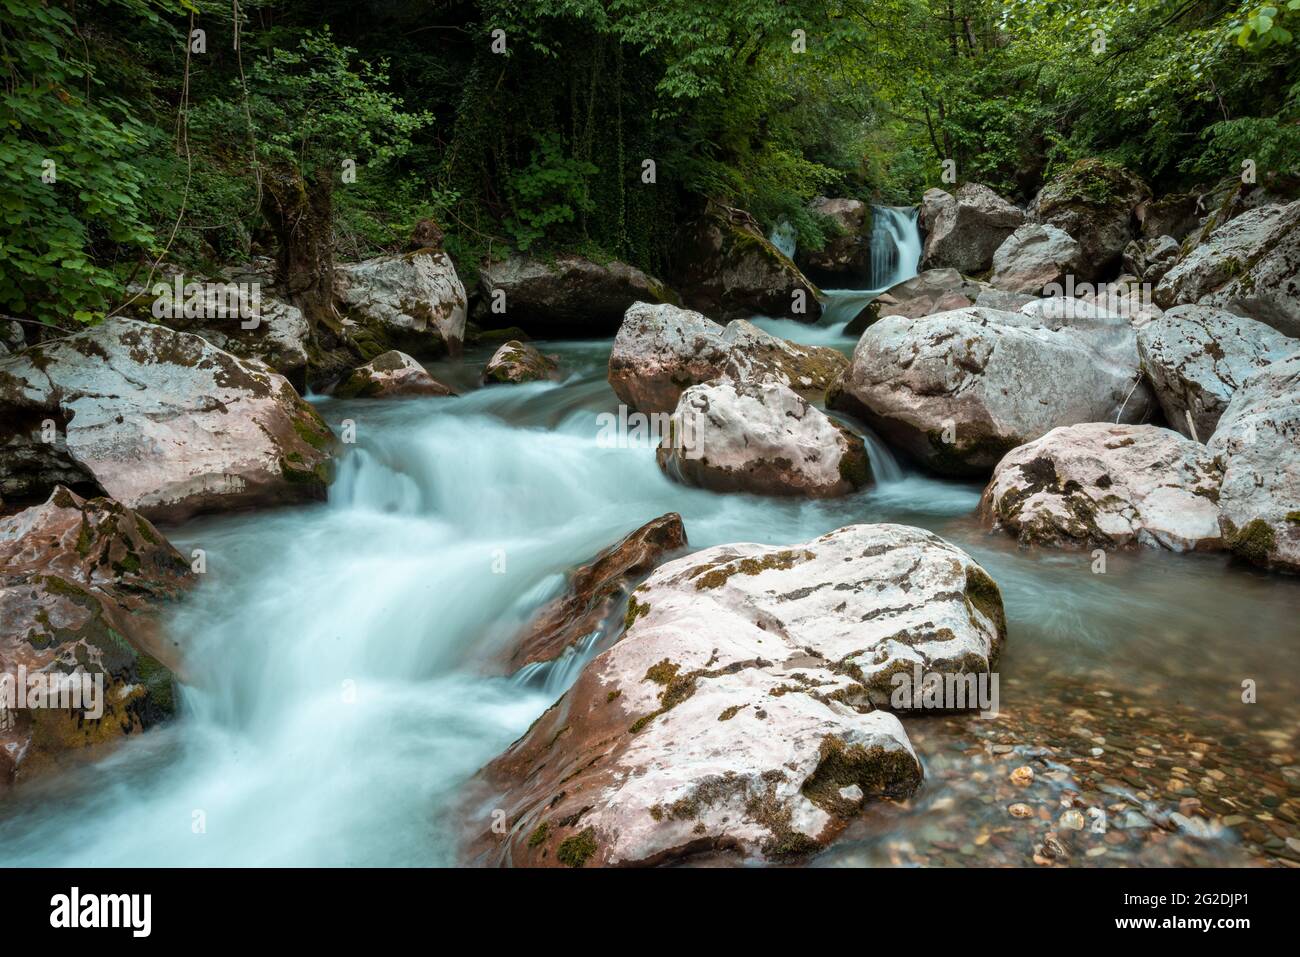 beautiful water oasis with clean water streams and rocks hidden in the forest Stock Photo